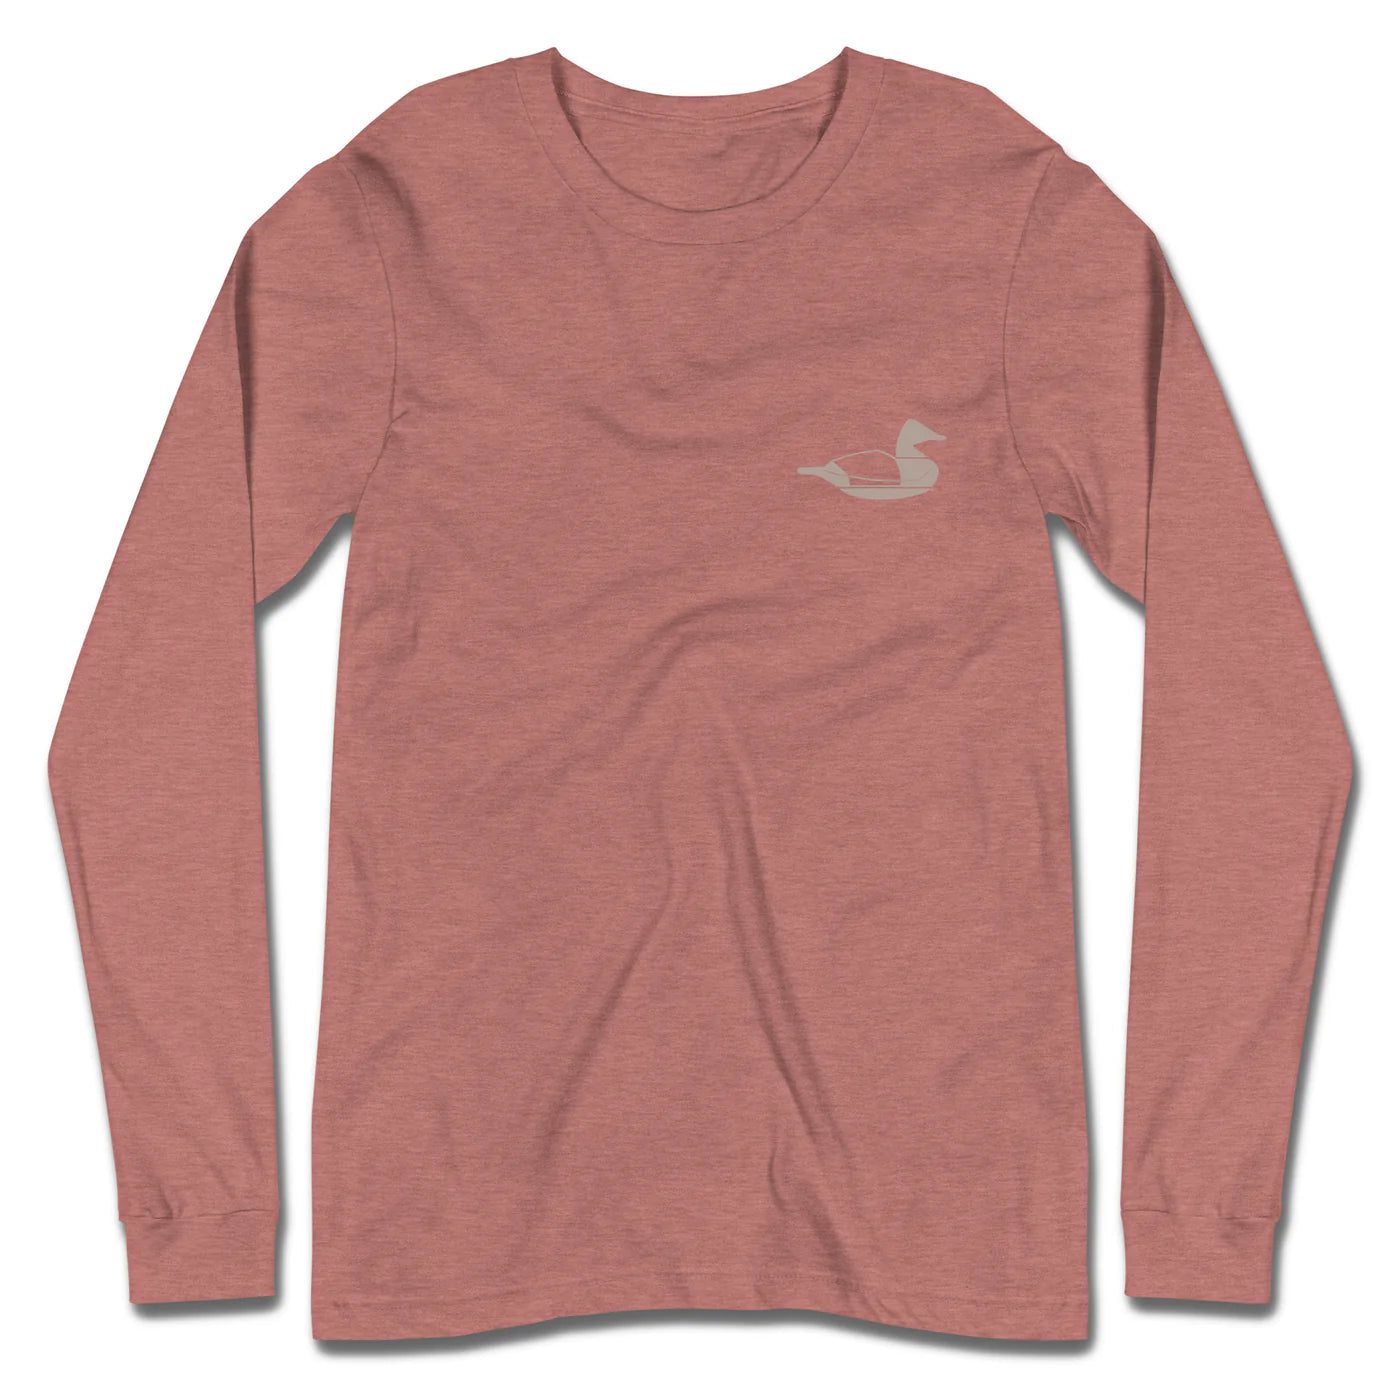 DIXIE DECOYS Men's Tees Final Sale - Dixie Decoys Tools Of The Trade Tee L/S || David's Clothing